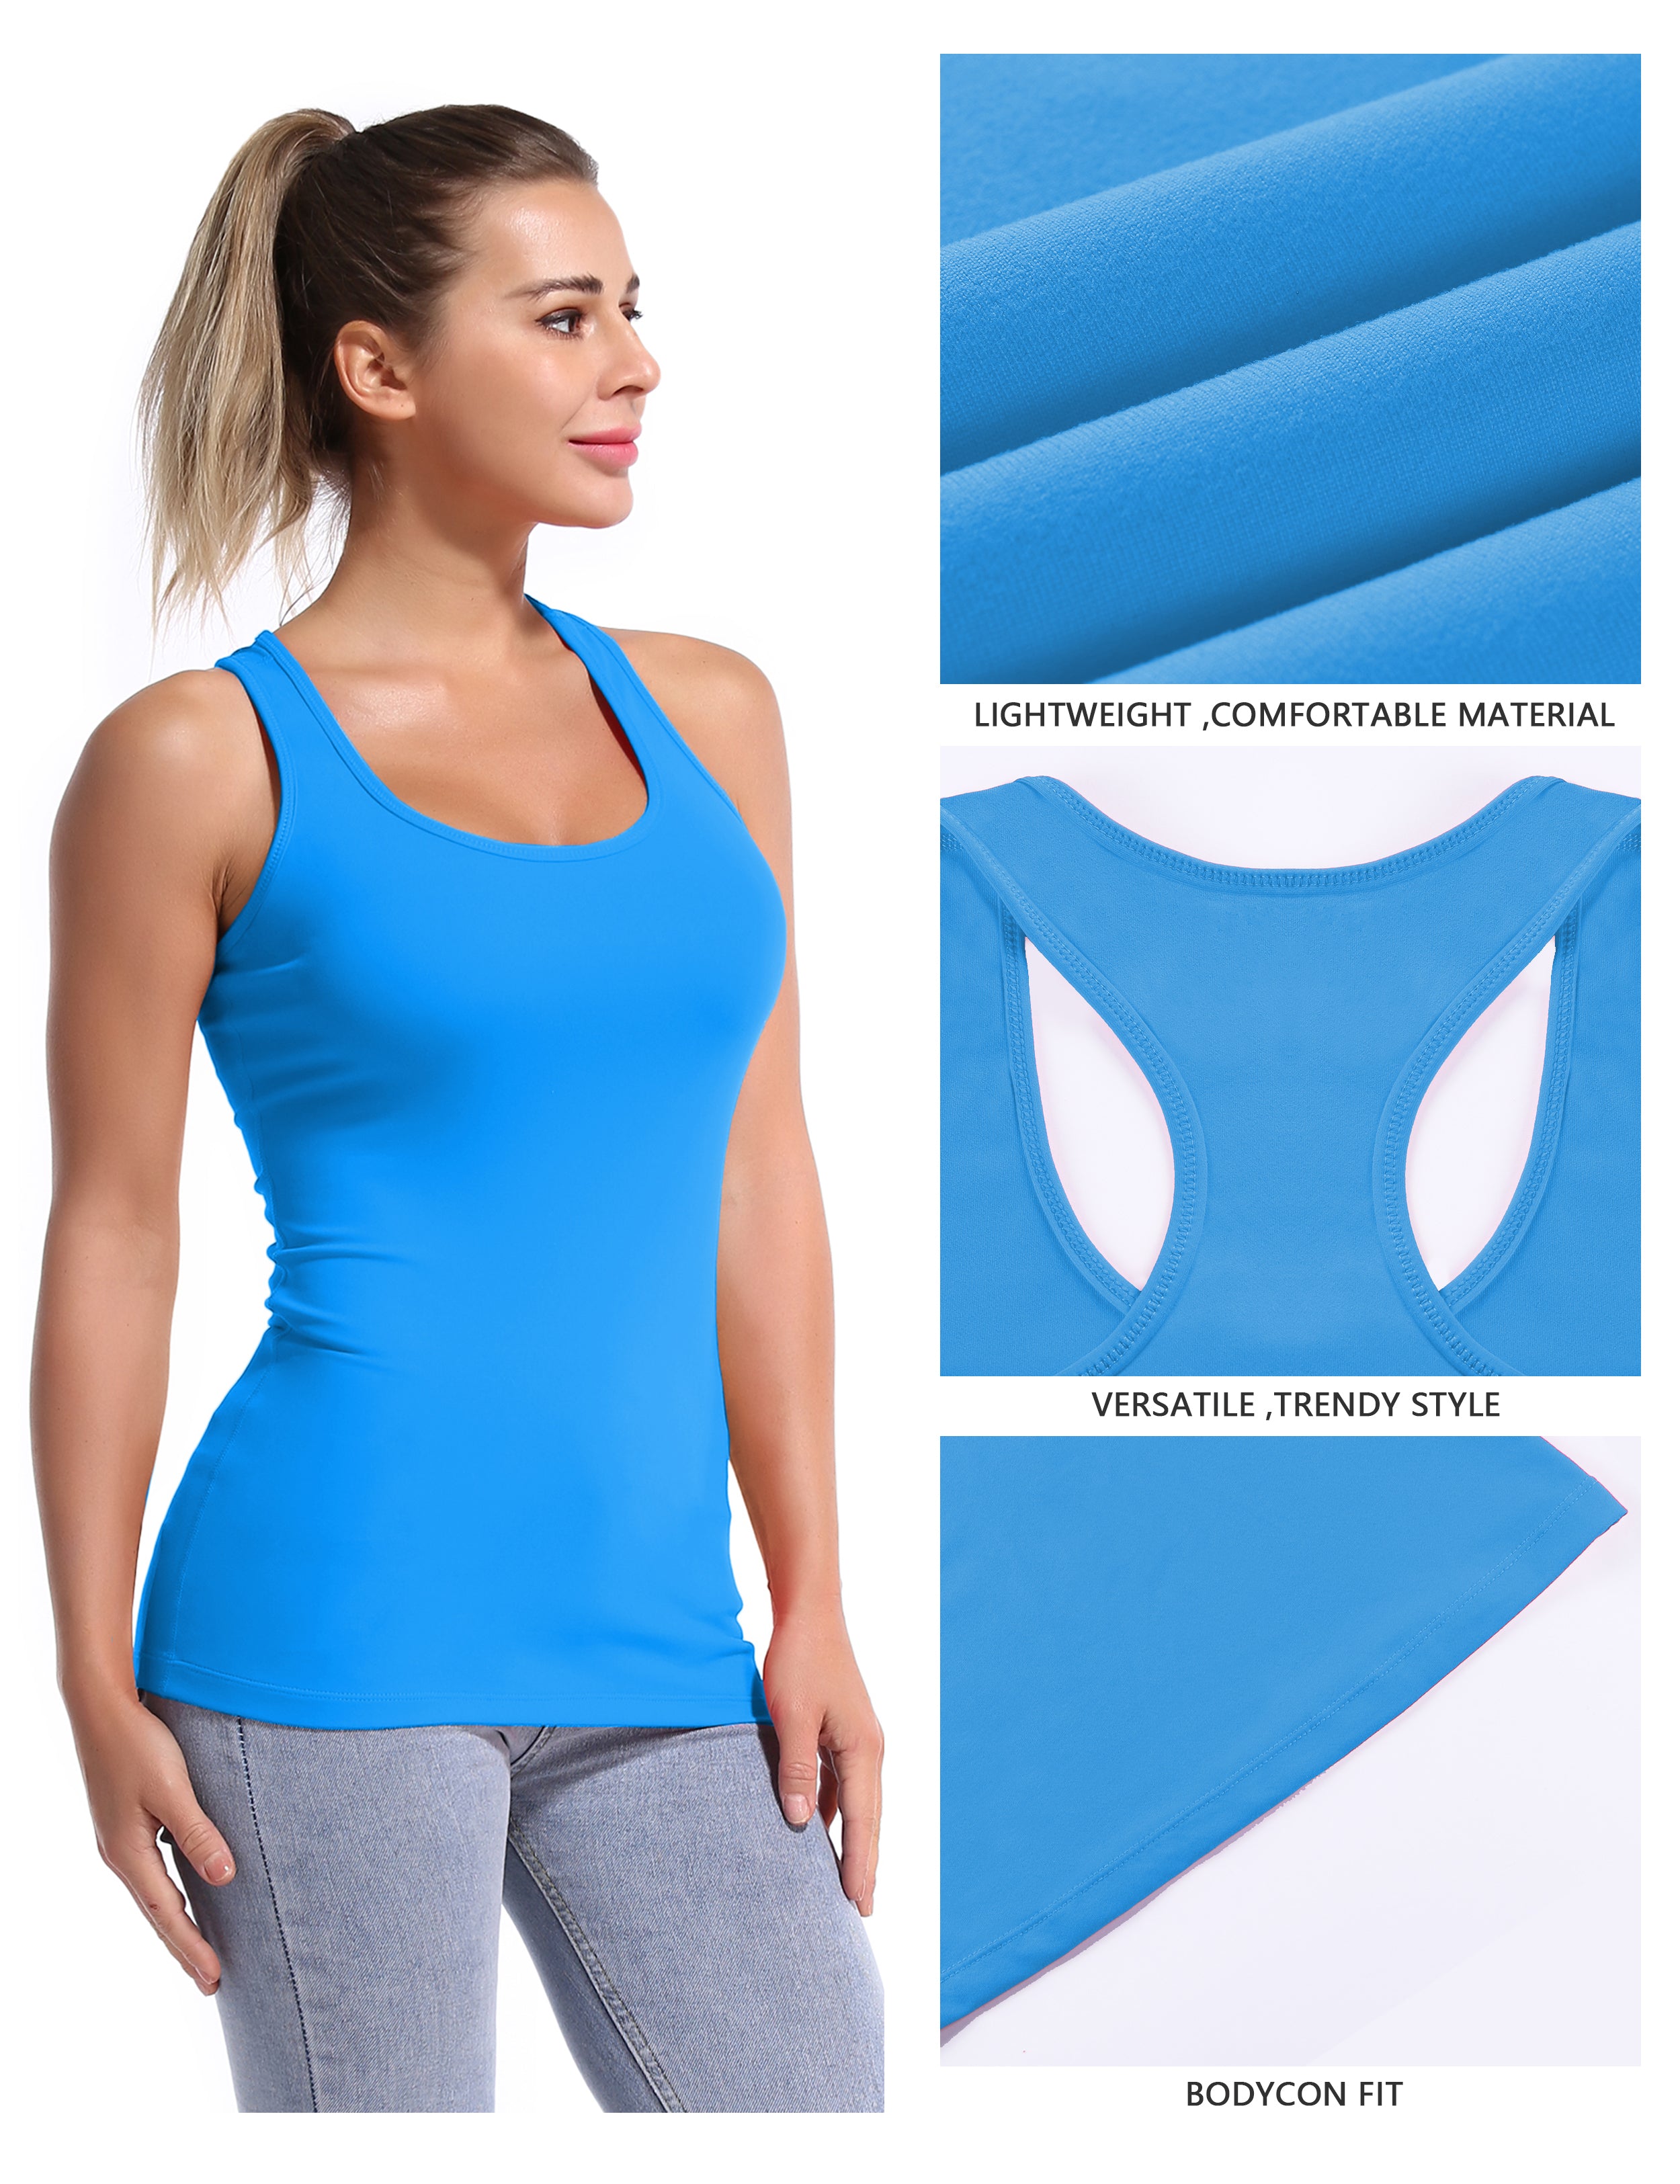 Racerback Athletic Tank Tops deepskyblue 92%Nylon/8%Spandex(Cotton Soft) Designed for Tall Size Tight Fit So buttery soft, it feels weightless Sweat-wicking Four-way stretch Breathable Contours your body Sits below the waistband for moderate, everyday coverage